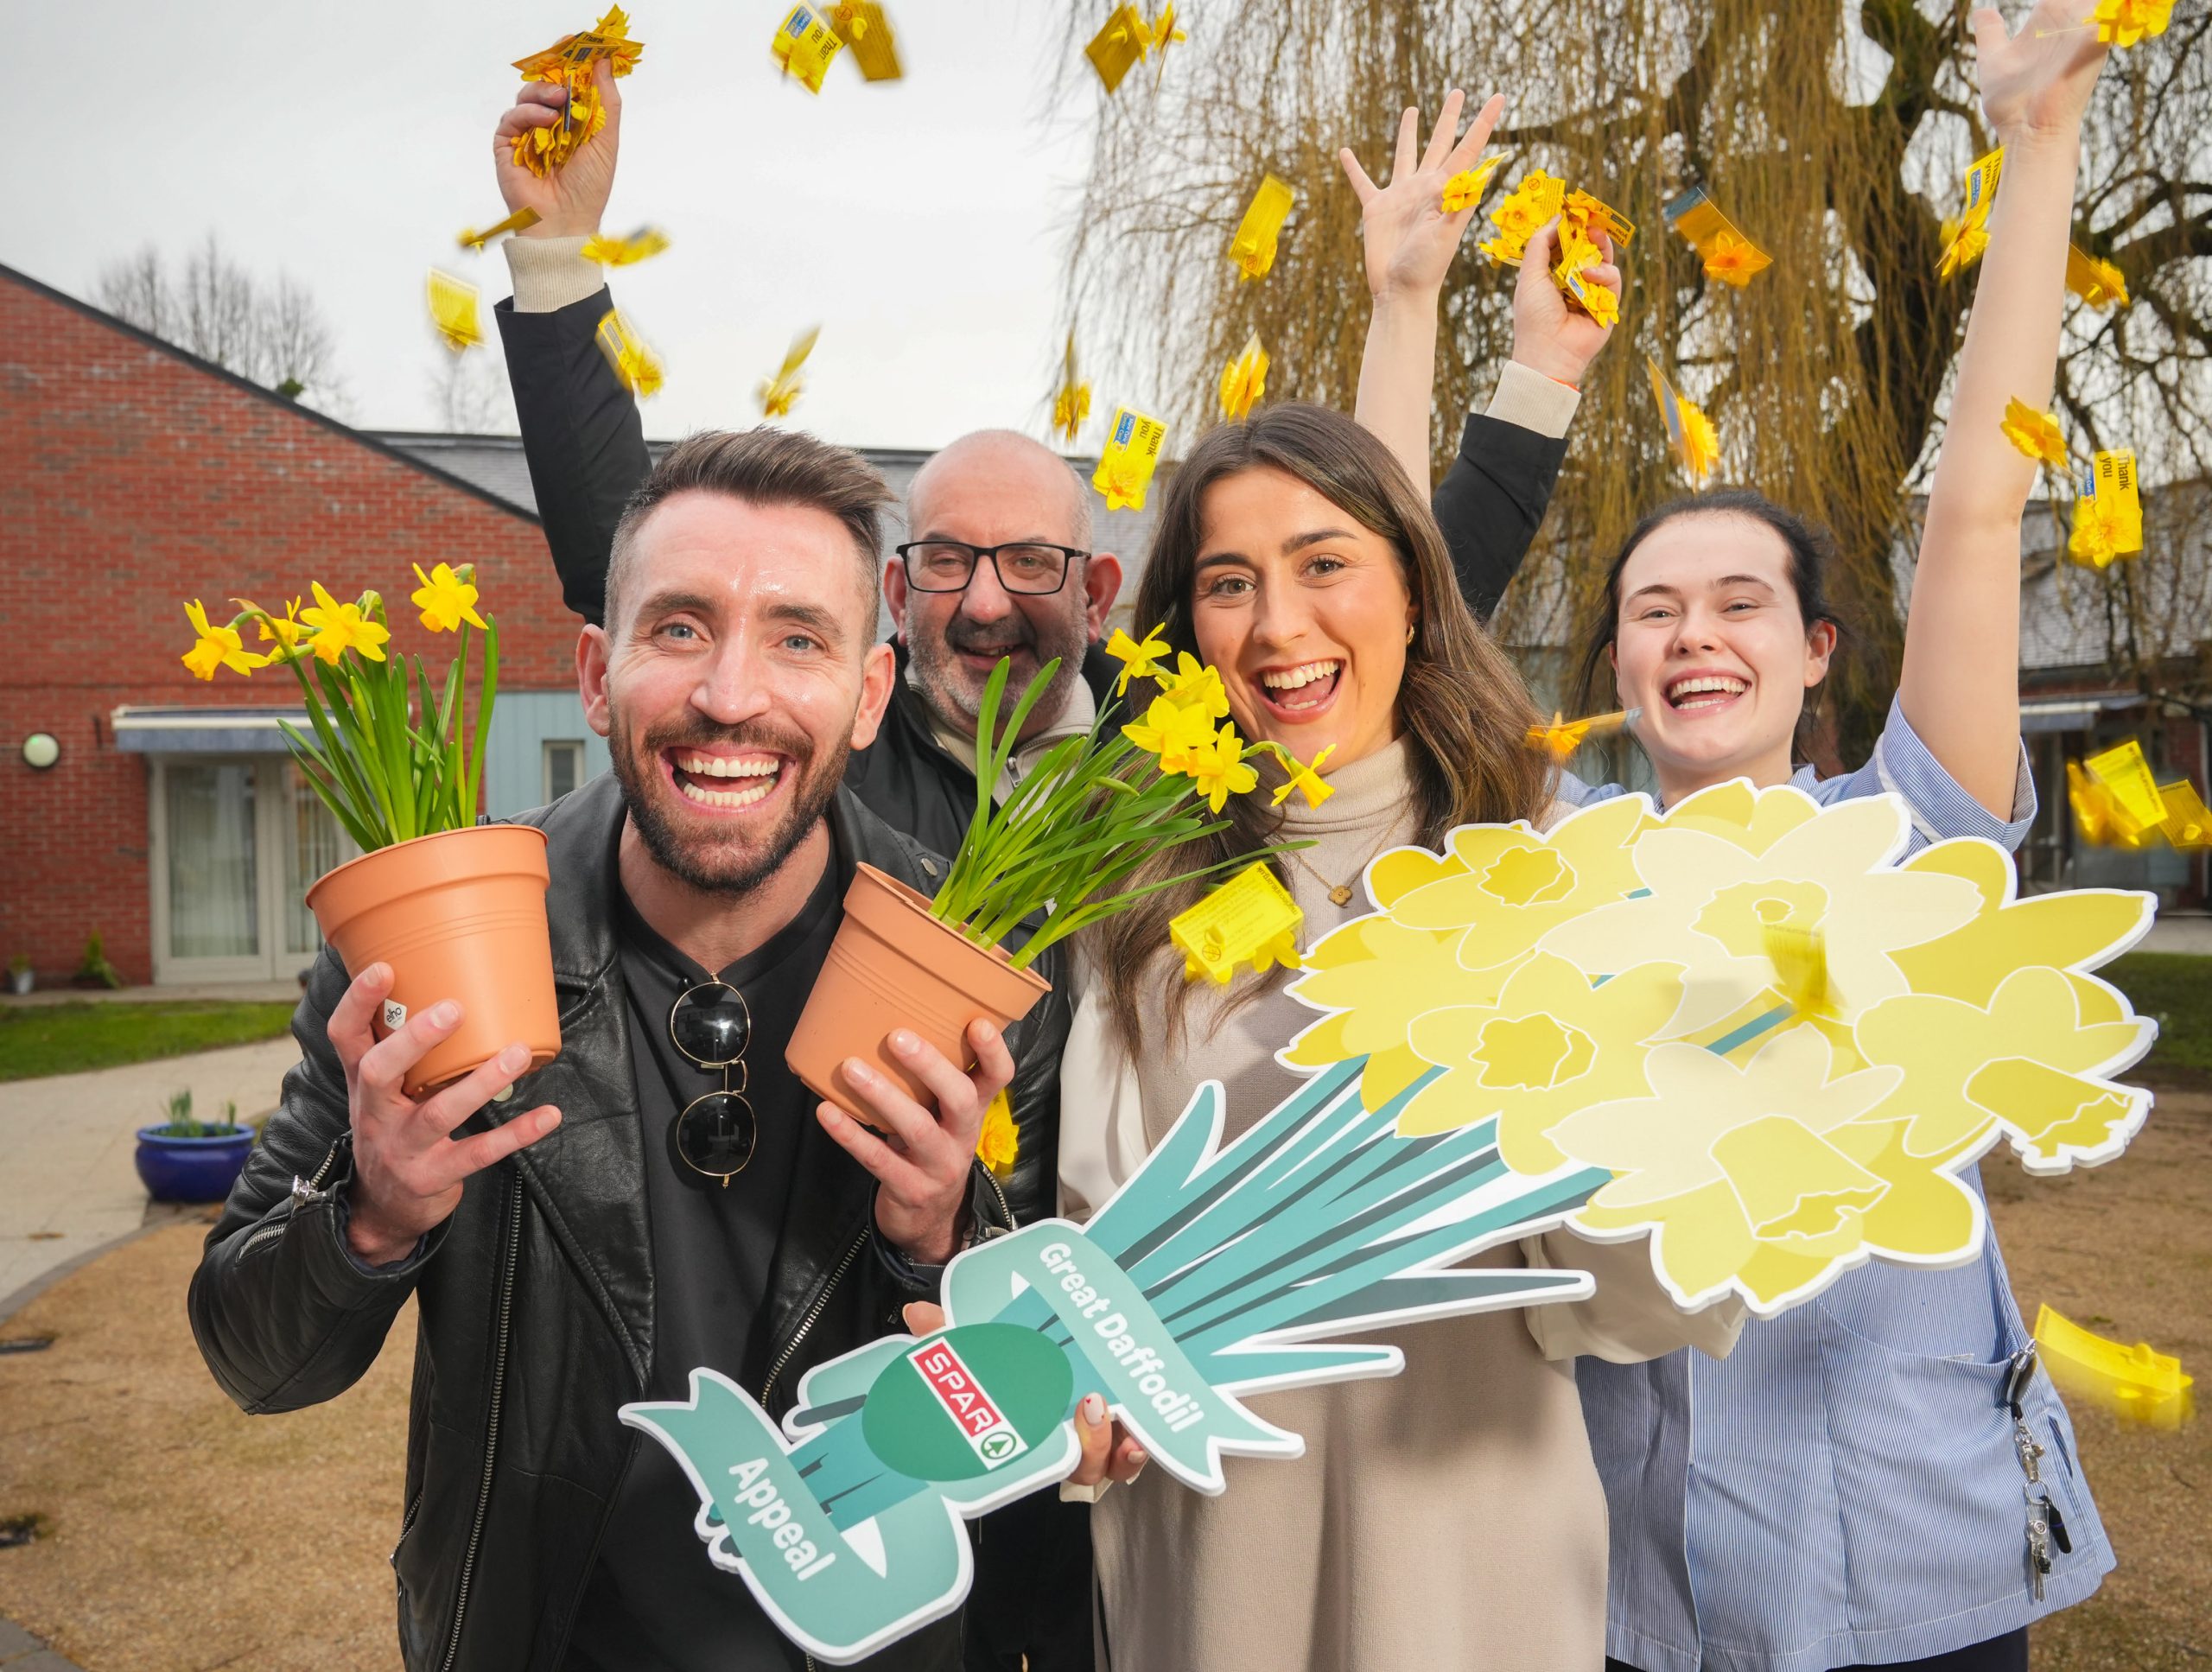 SPAR stores offer a bunch of support for Marie Curie’s Great Daffodil Appeal